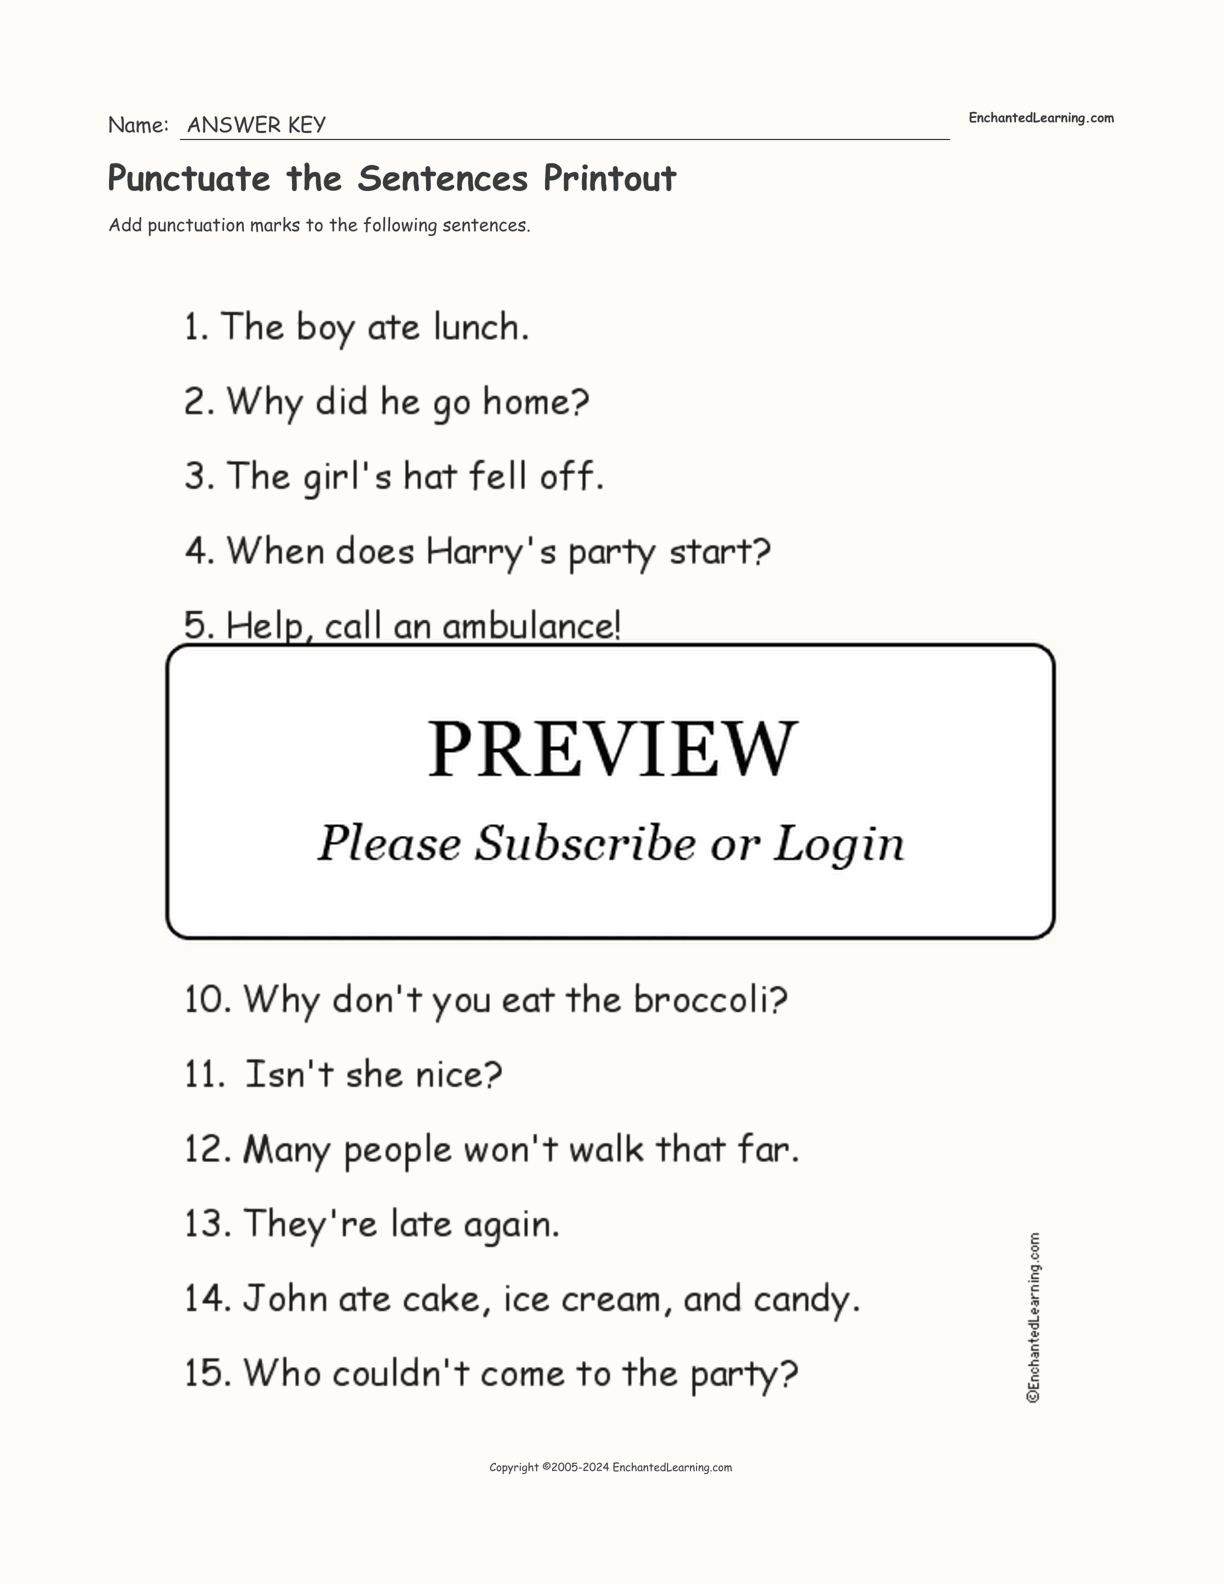 Punctuate the Sentences Printout interactive worksheet page 2